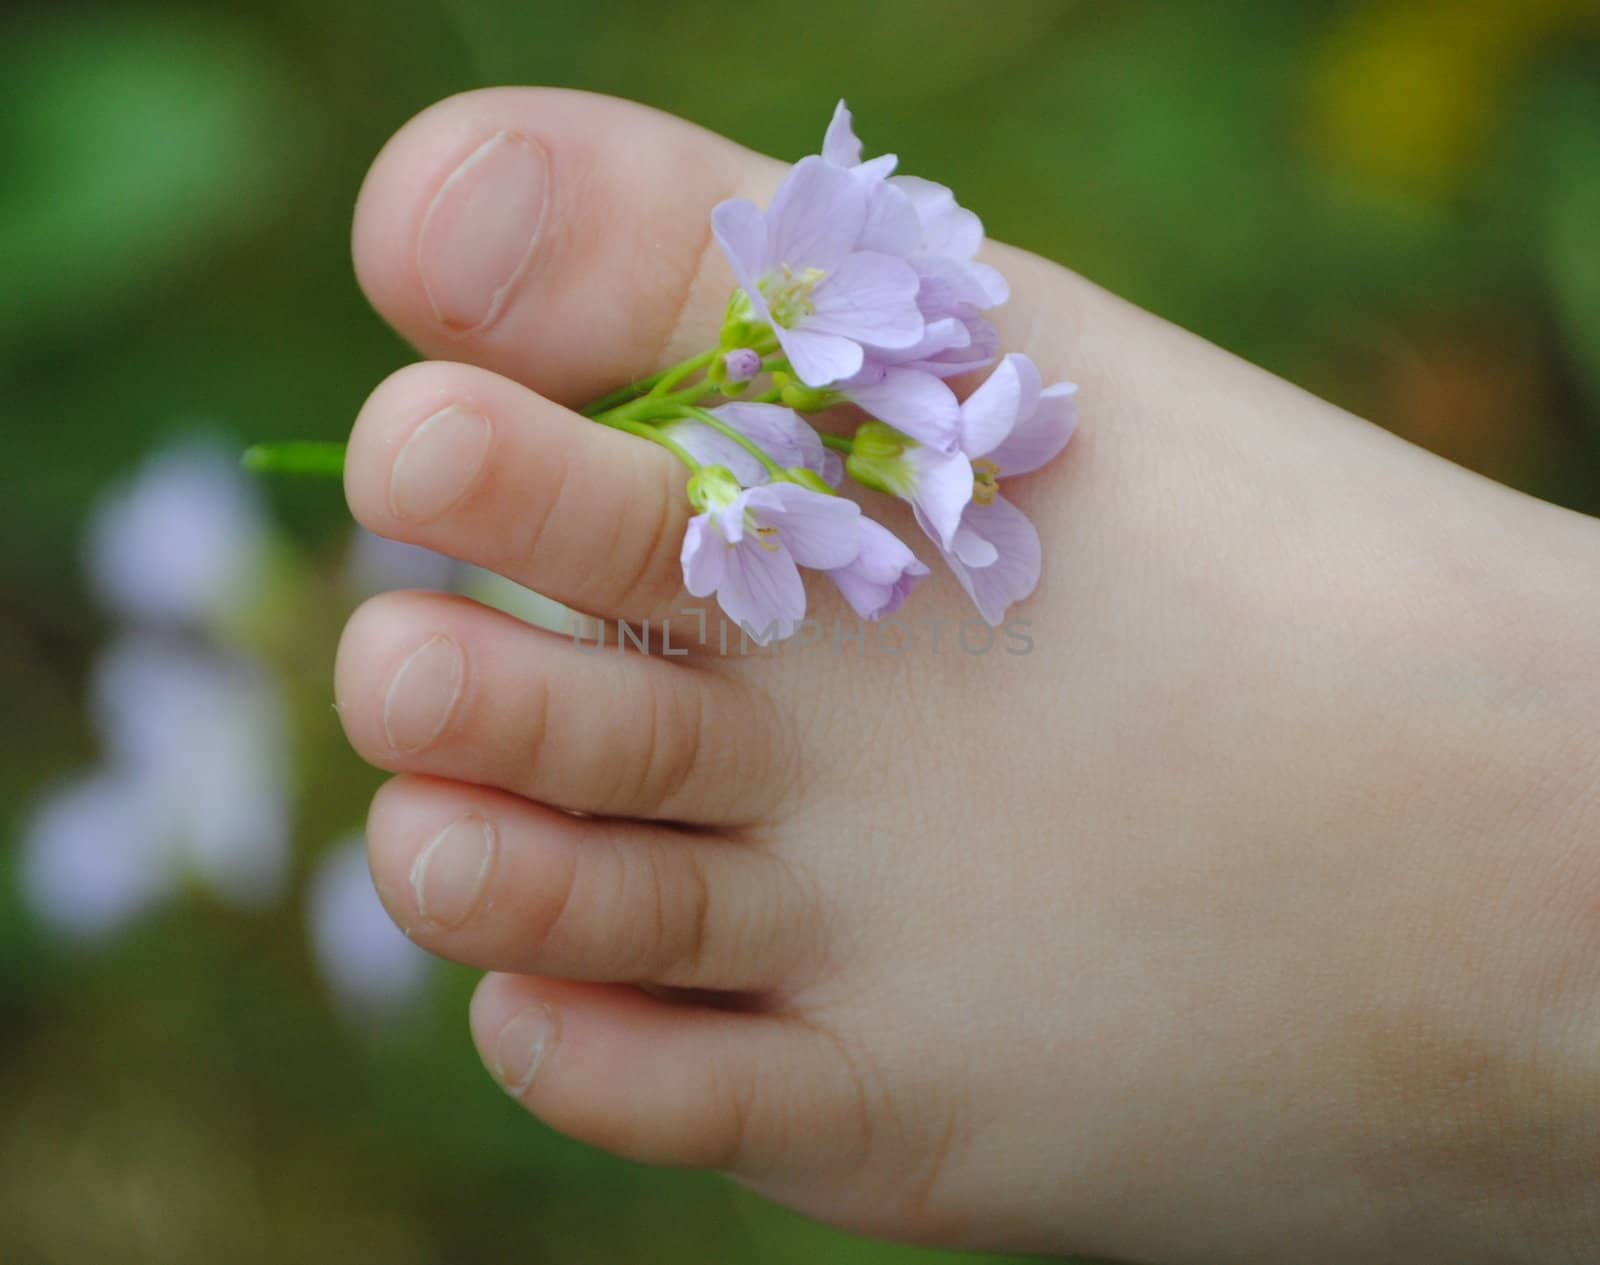 childs toes by viviolsen